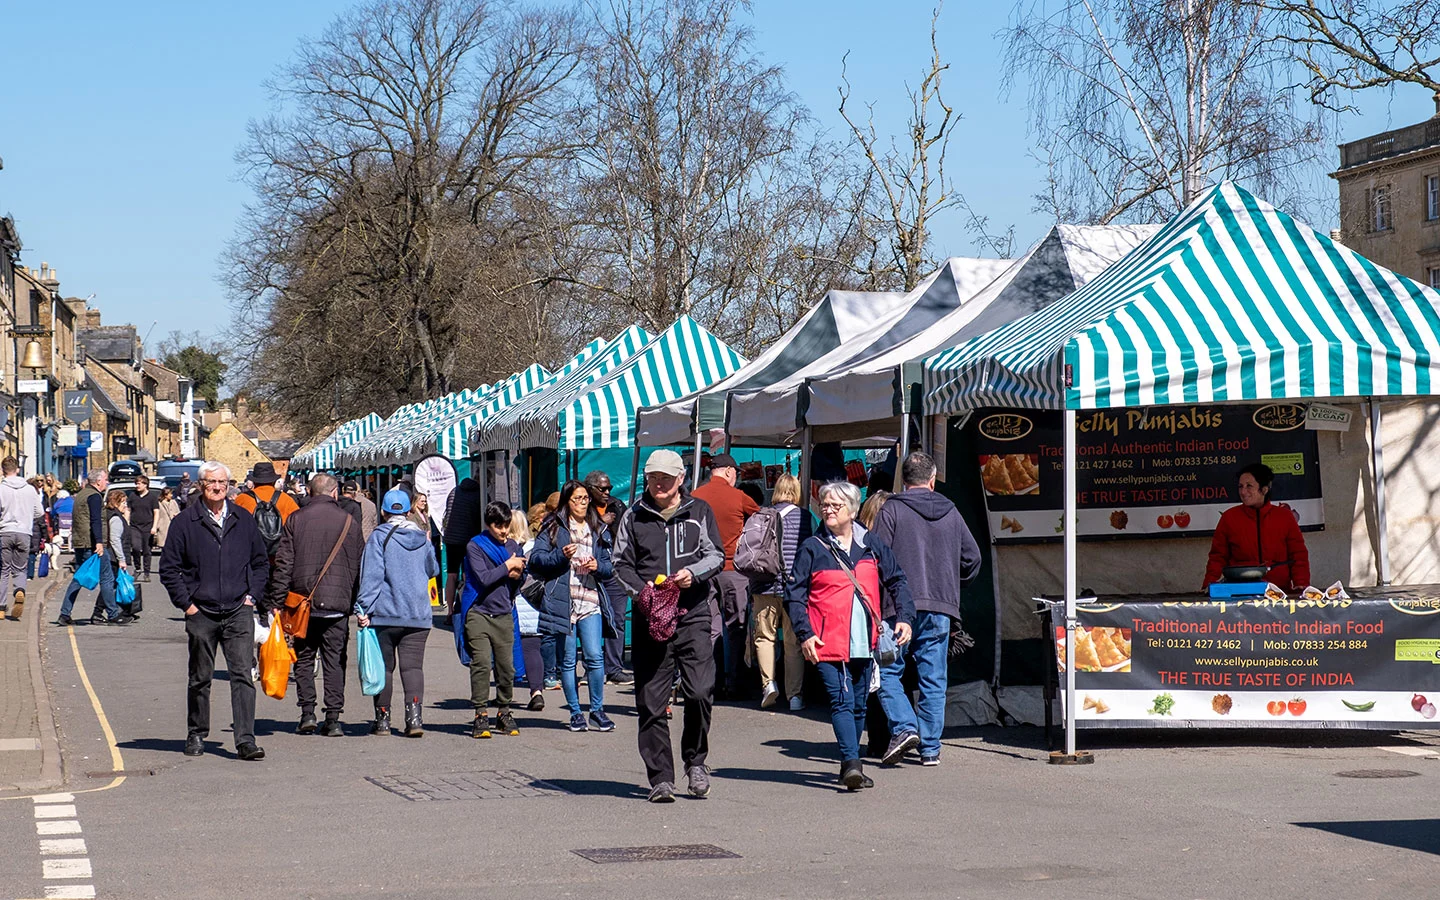 The Tuesday market, one of the most popular things to do in Moreton-in-Marsh